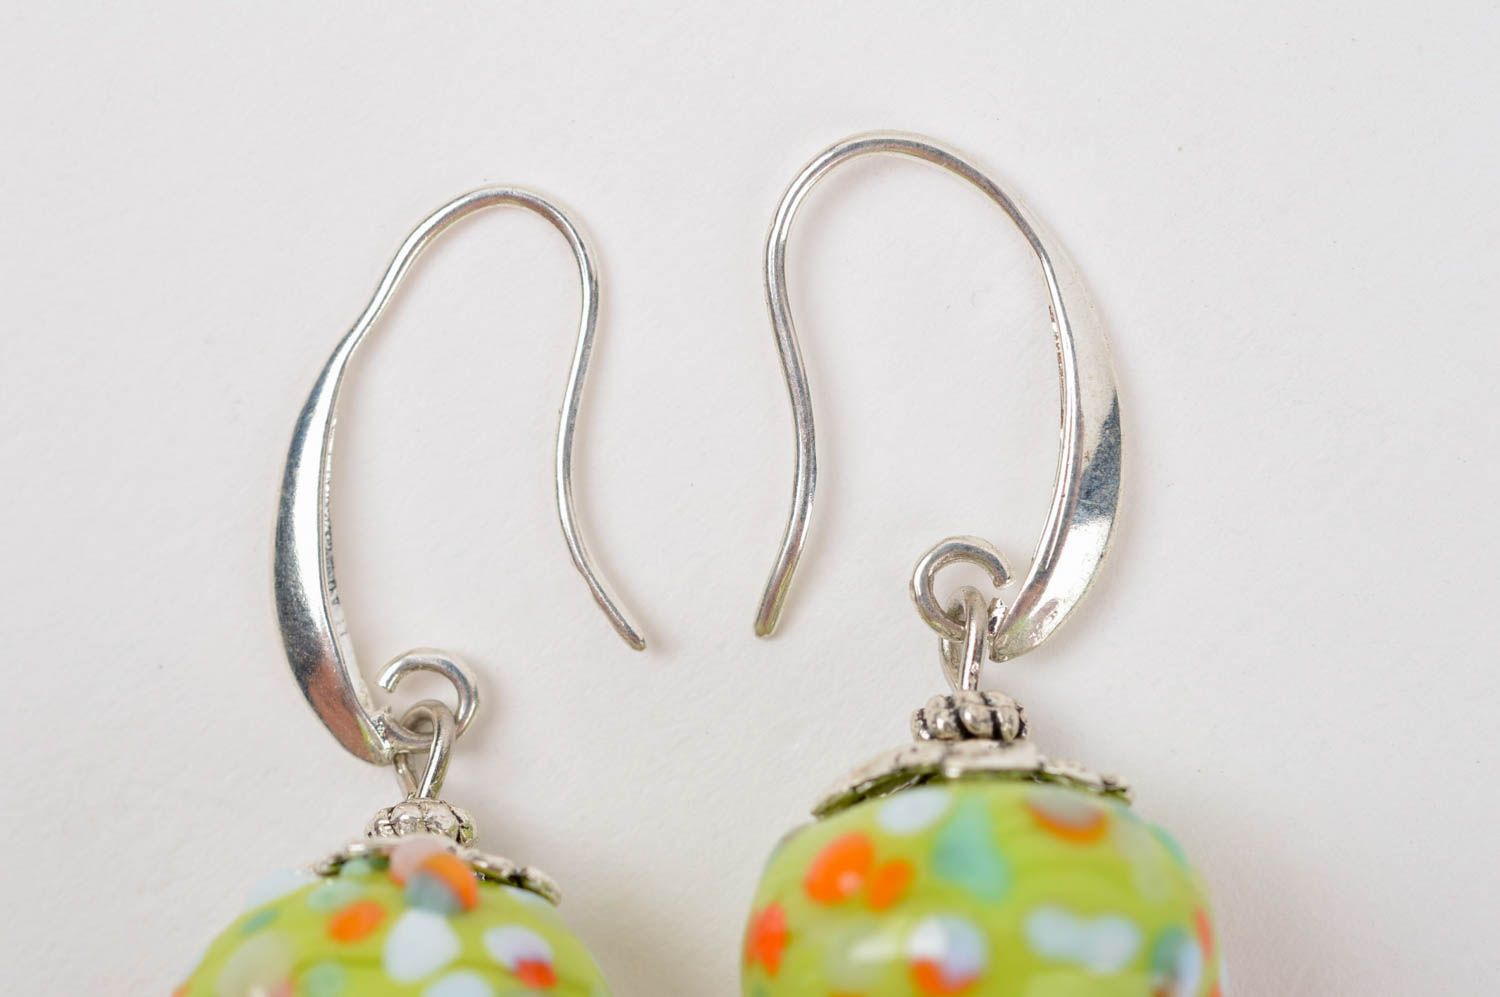 Stylish handmade glass earrings fashion trends fashion accessories for girls photo 3